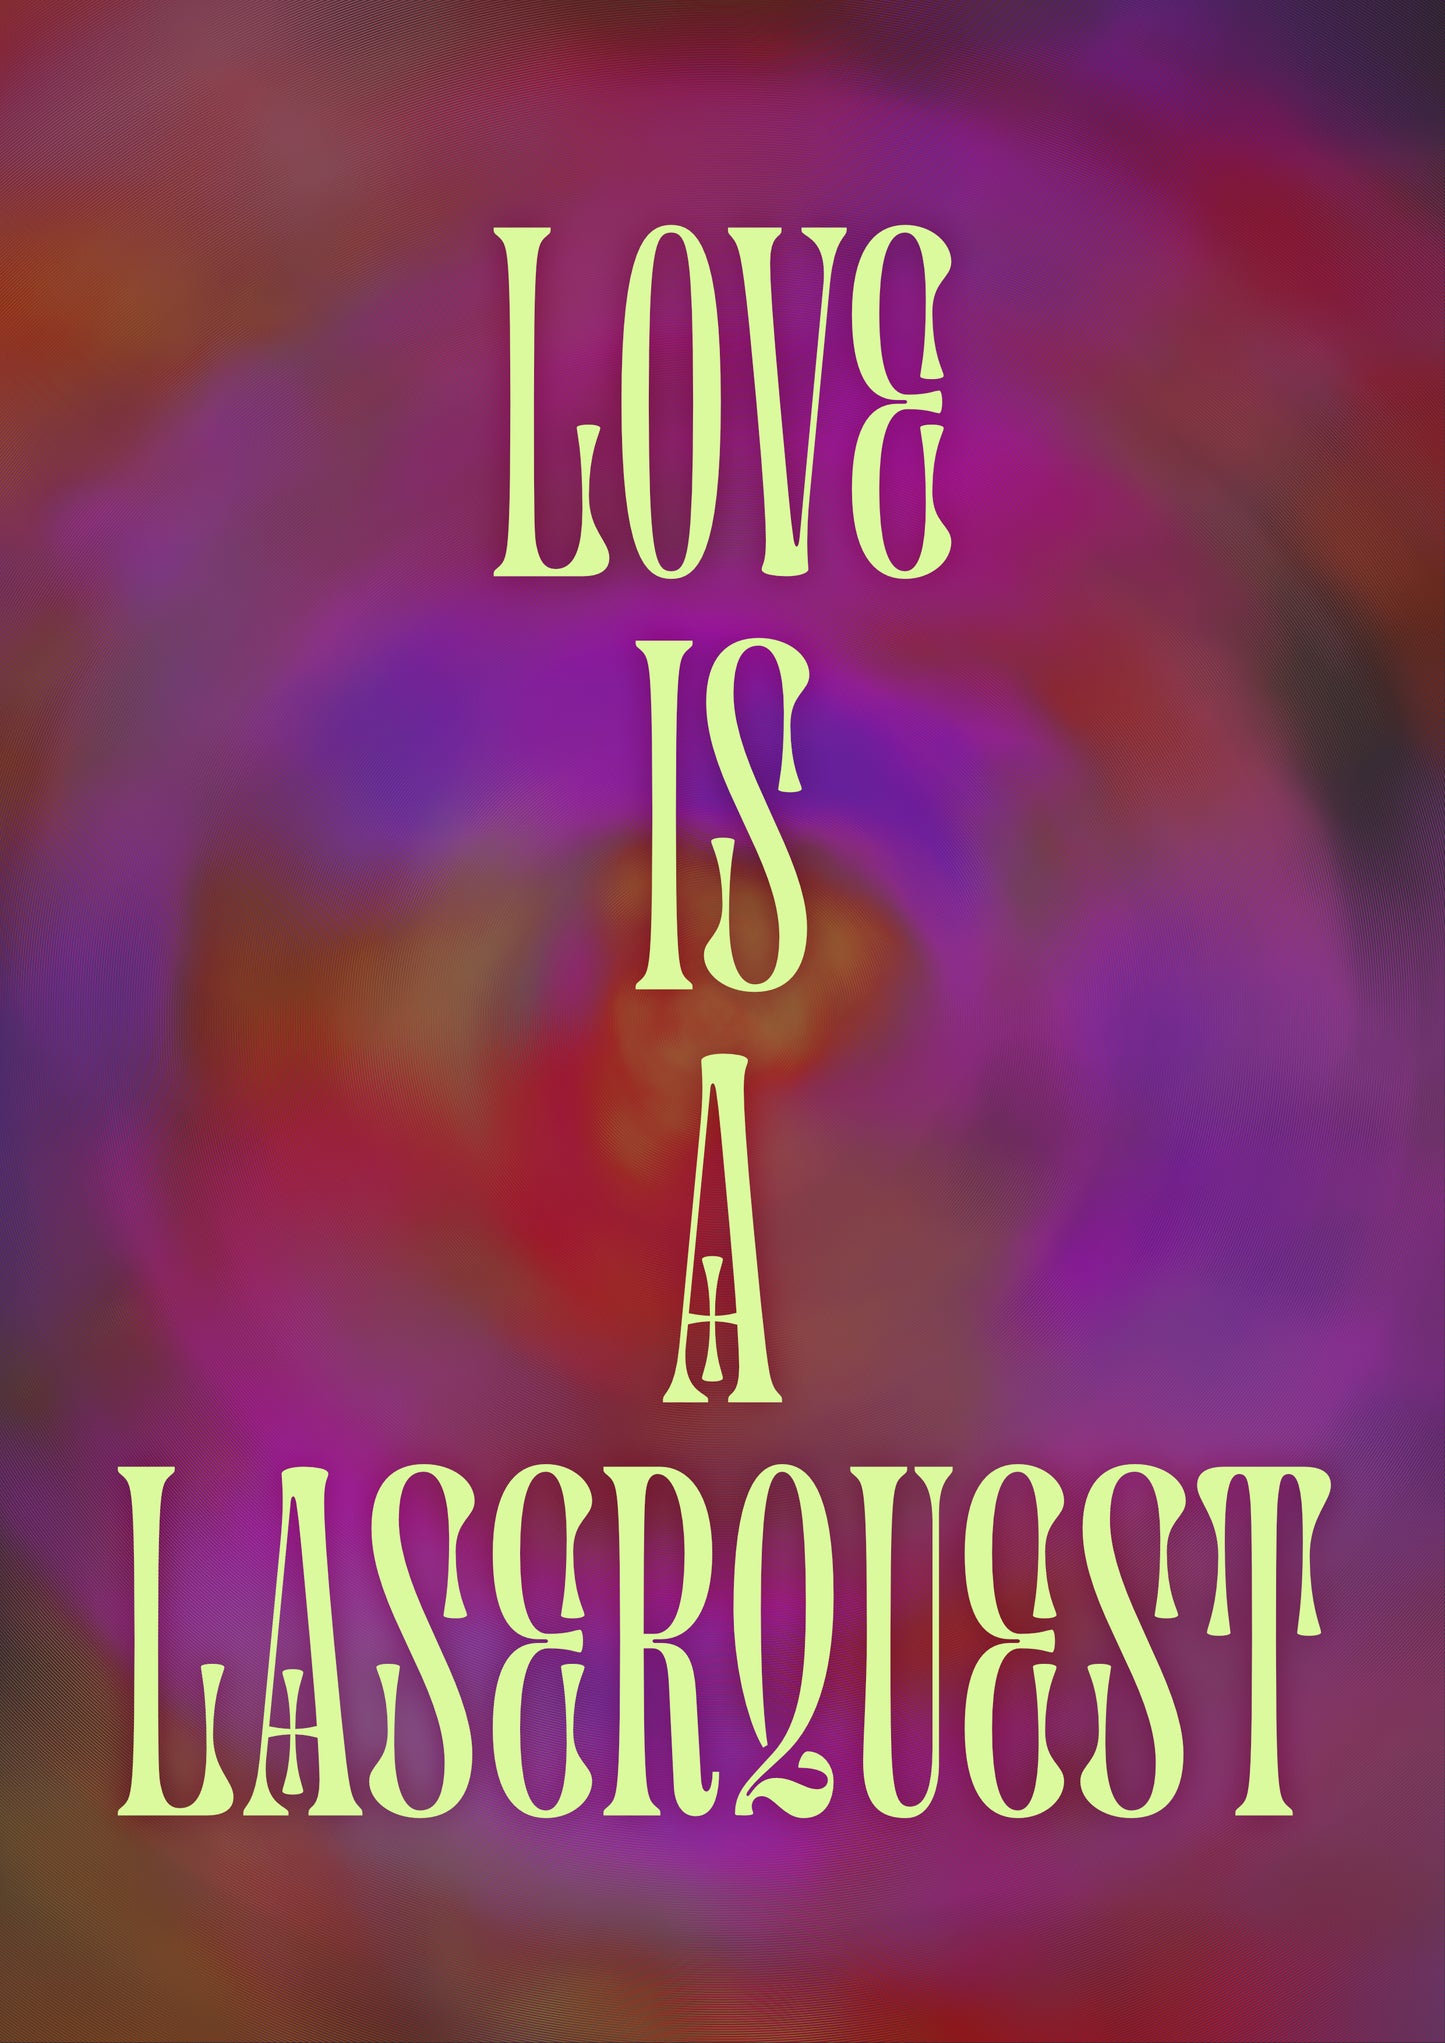 LOVE IS A LASERQUEST